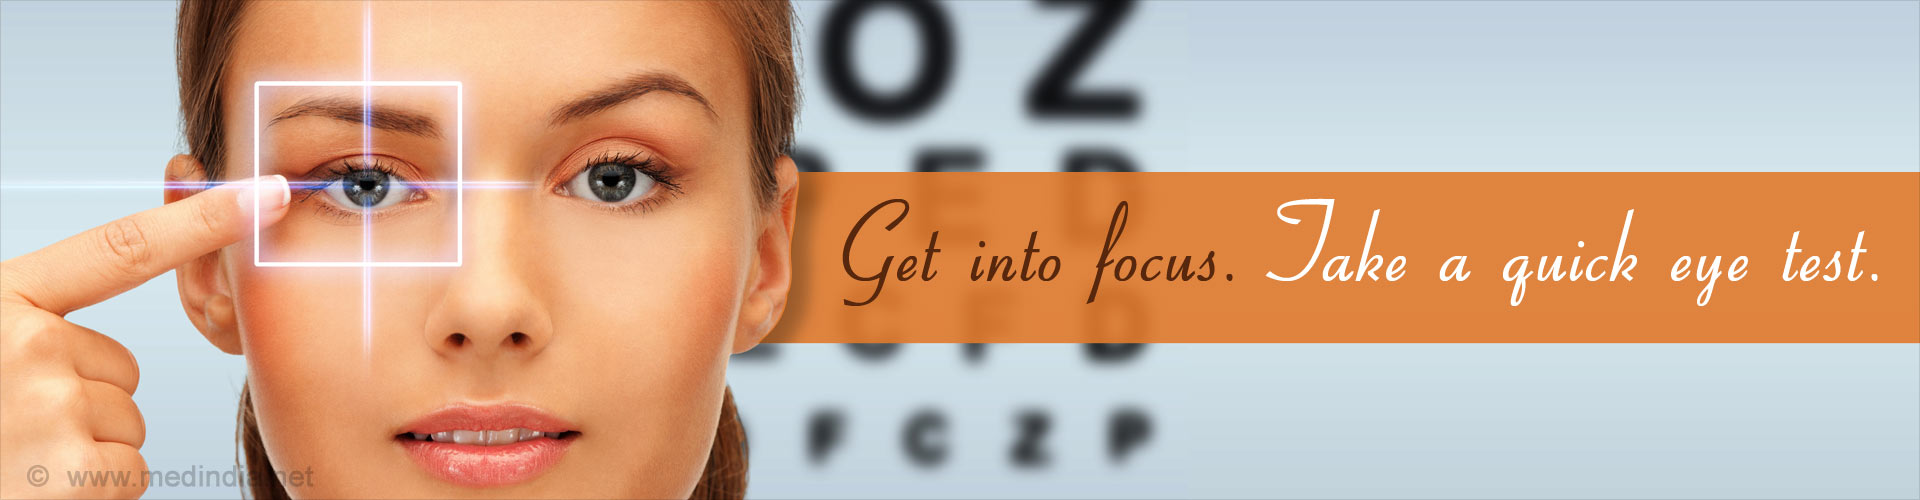 Get into focus. Take a quick eye test.